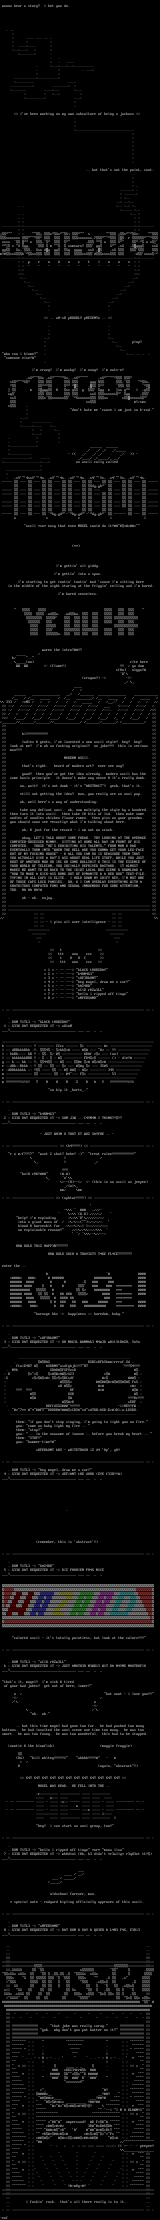 Moden Ascii Colly by Mogel